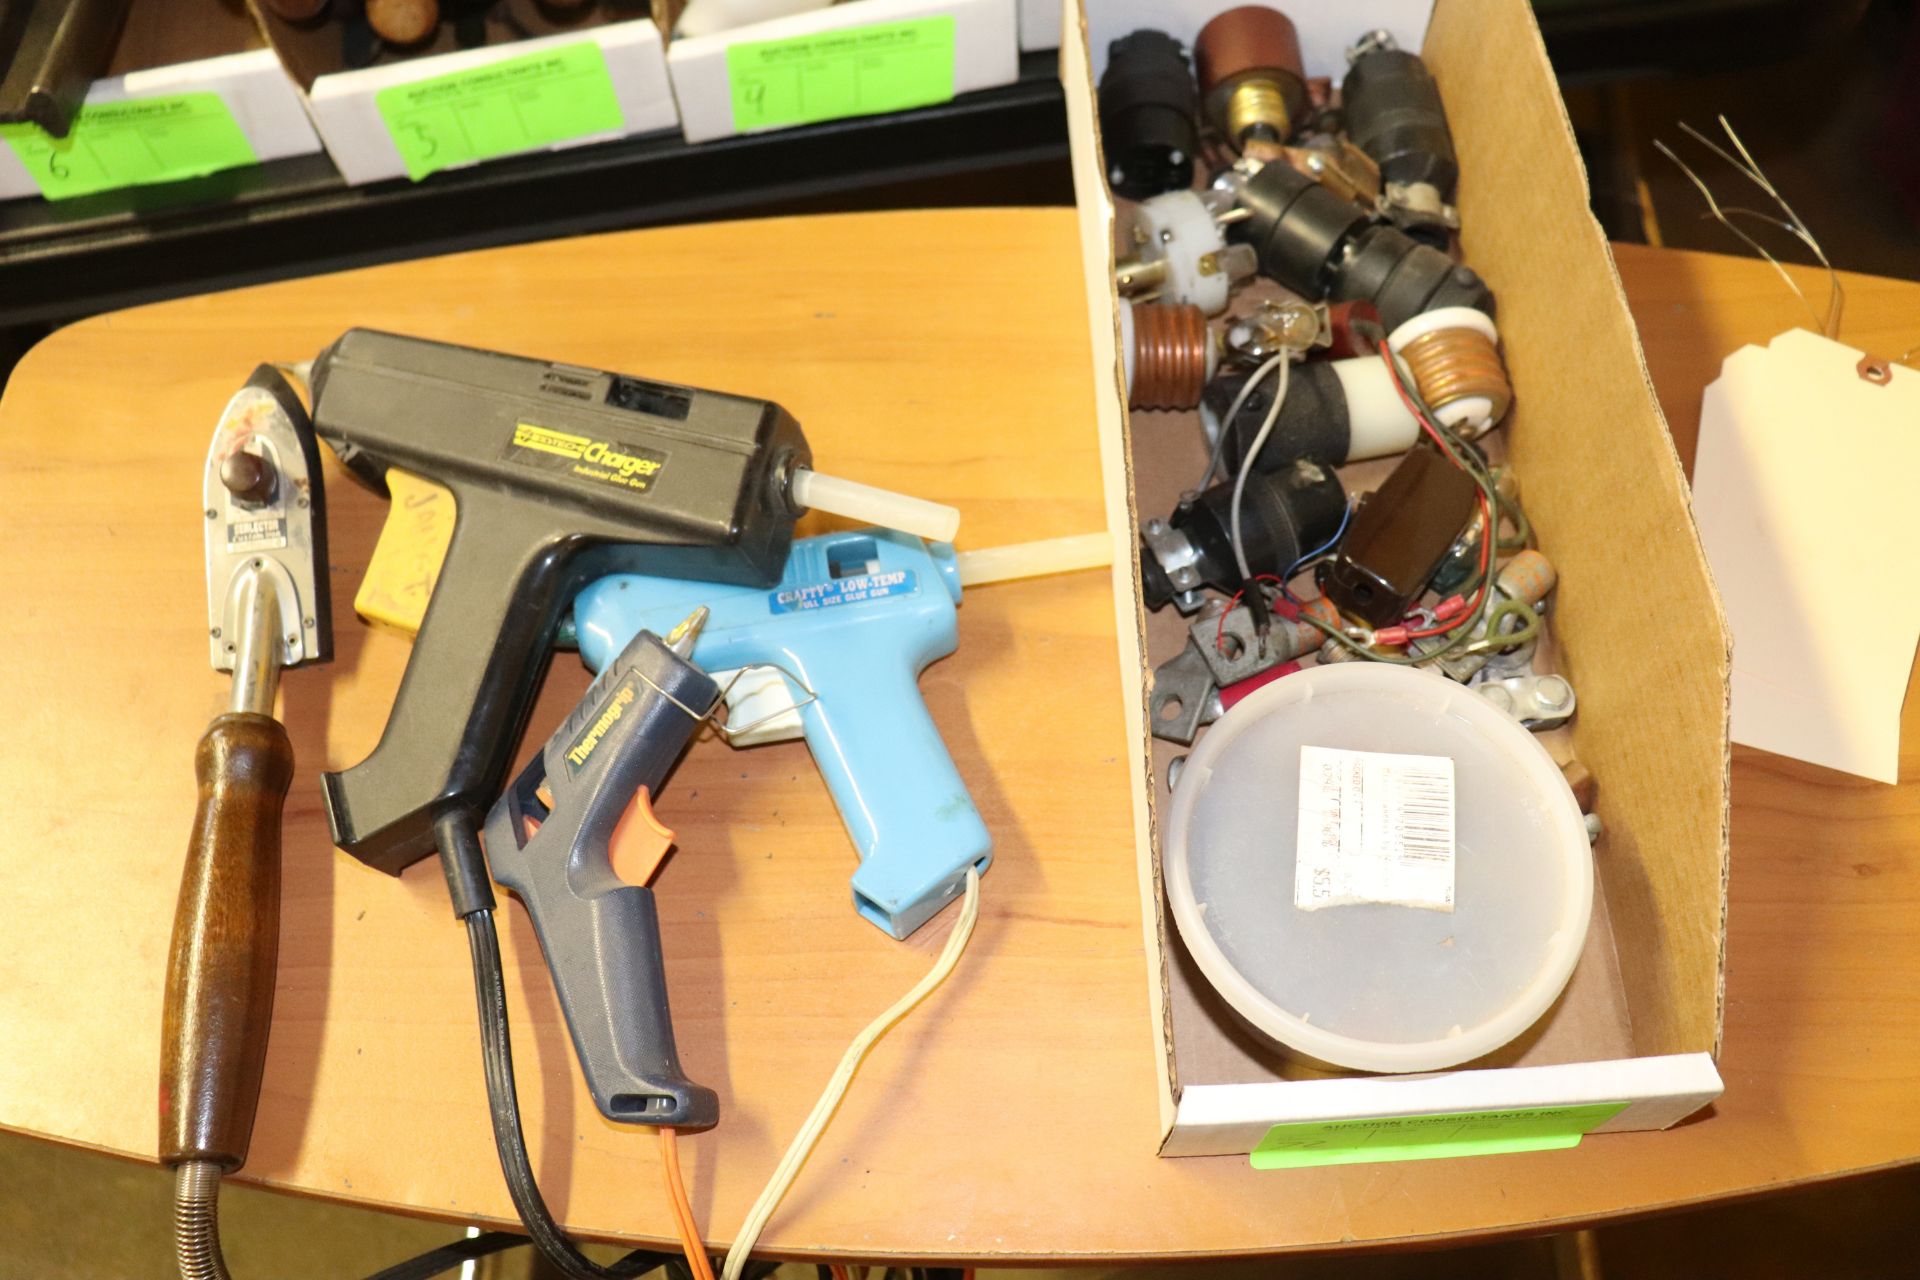 Seal Selector, 3 glue guns, and miscellaneous connectors